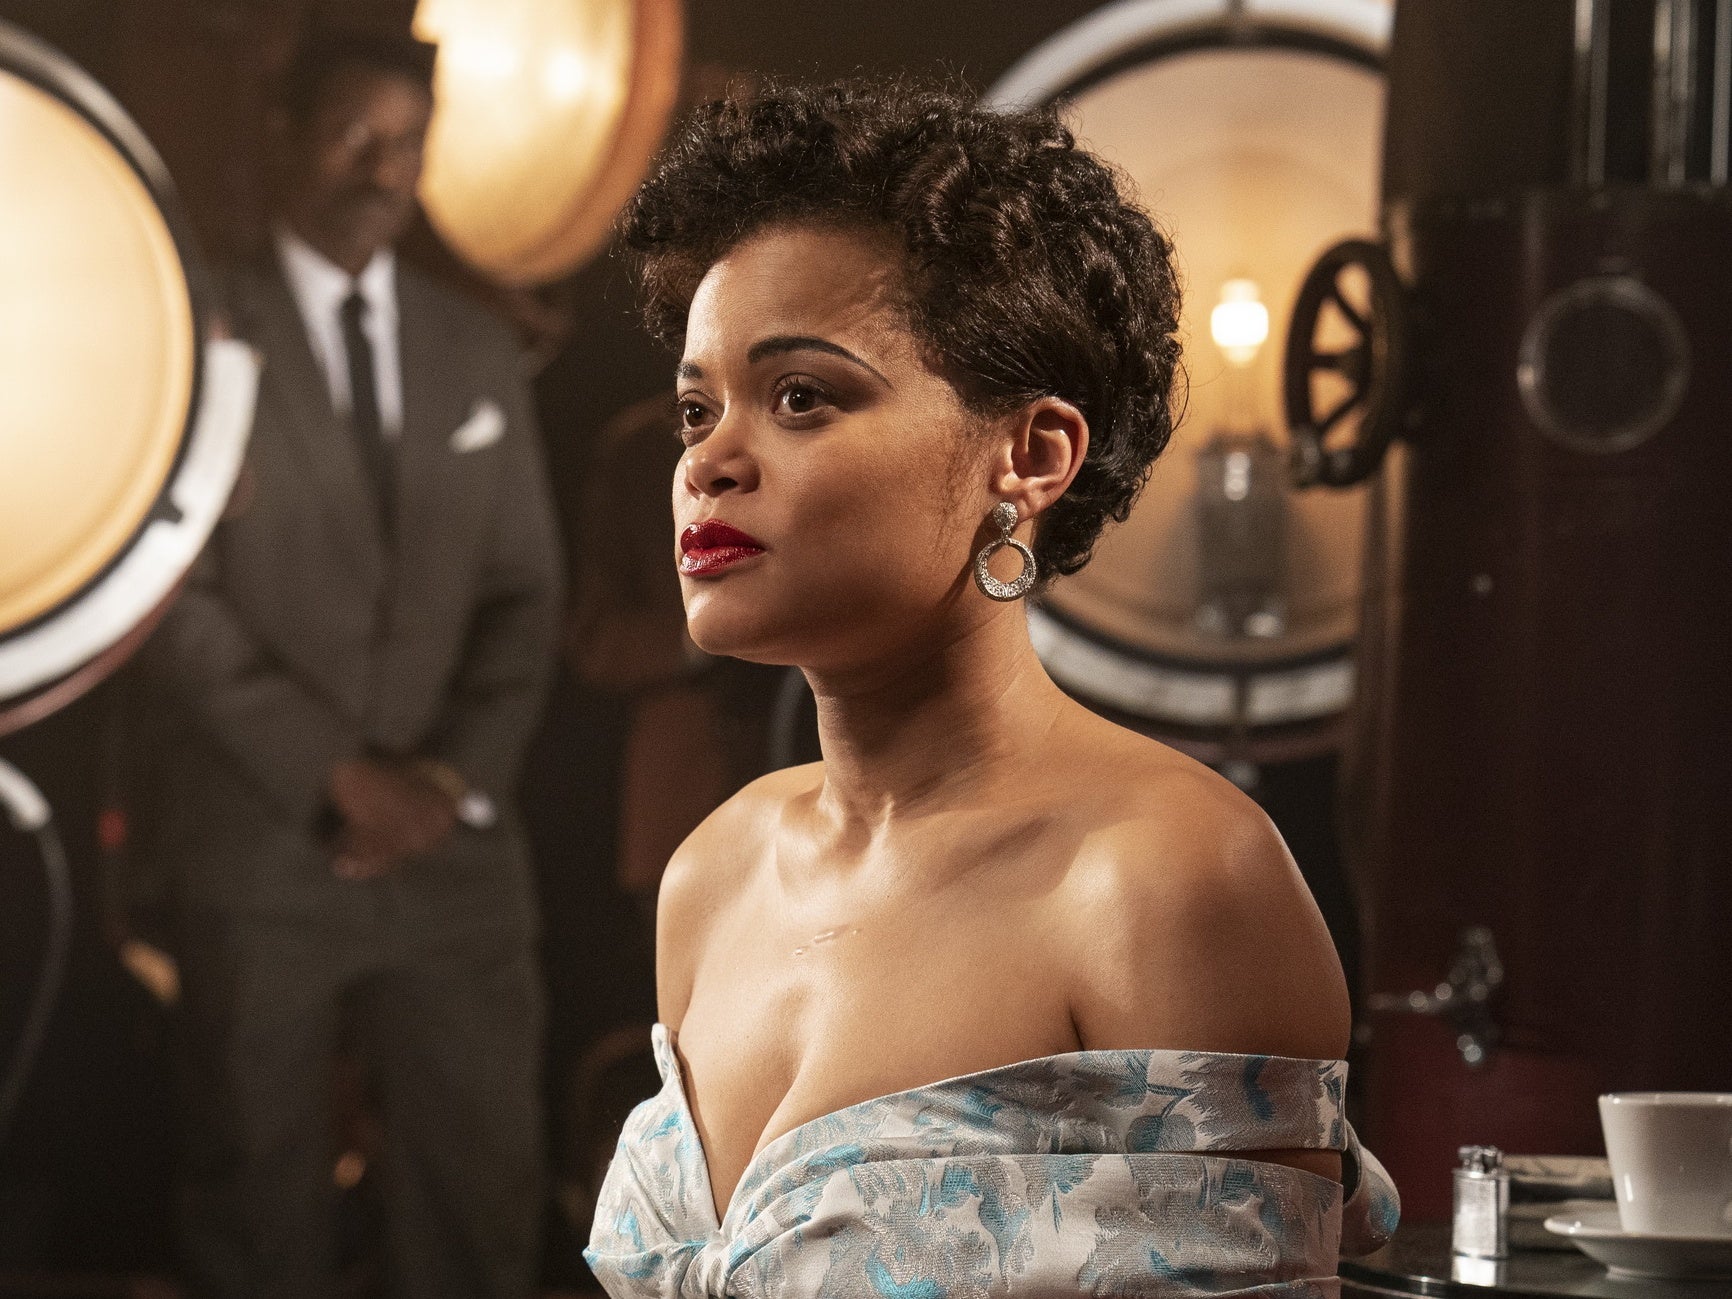 Prada Shares Designs For Upcoming Billie Holiday Film Starring Andra Day